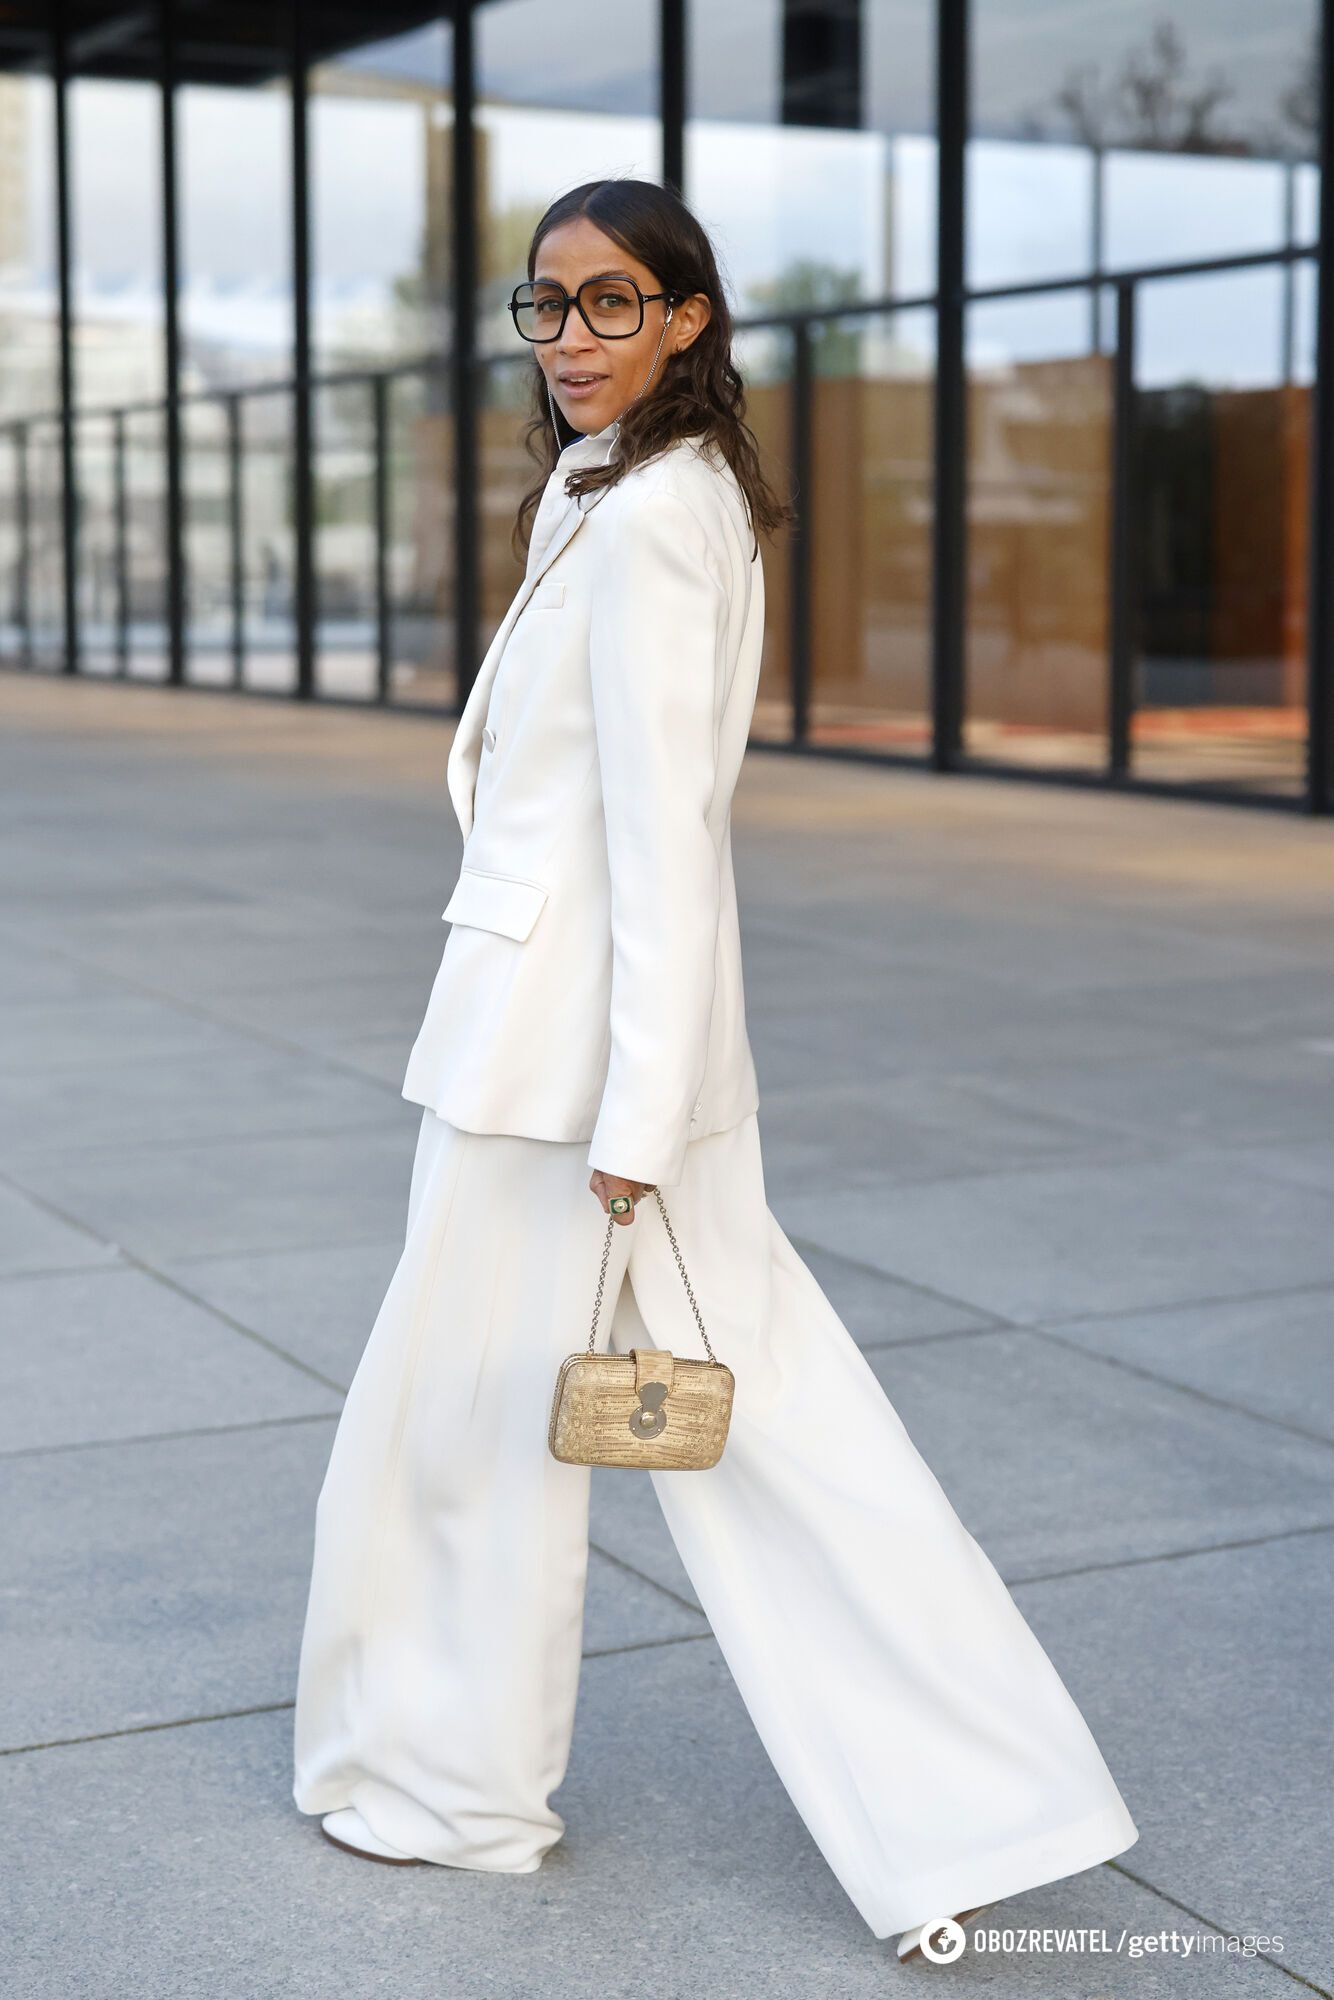 The white pantsuit is a great analogue to a dress